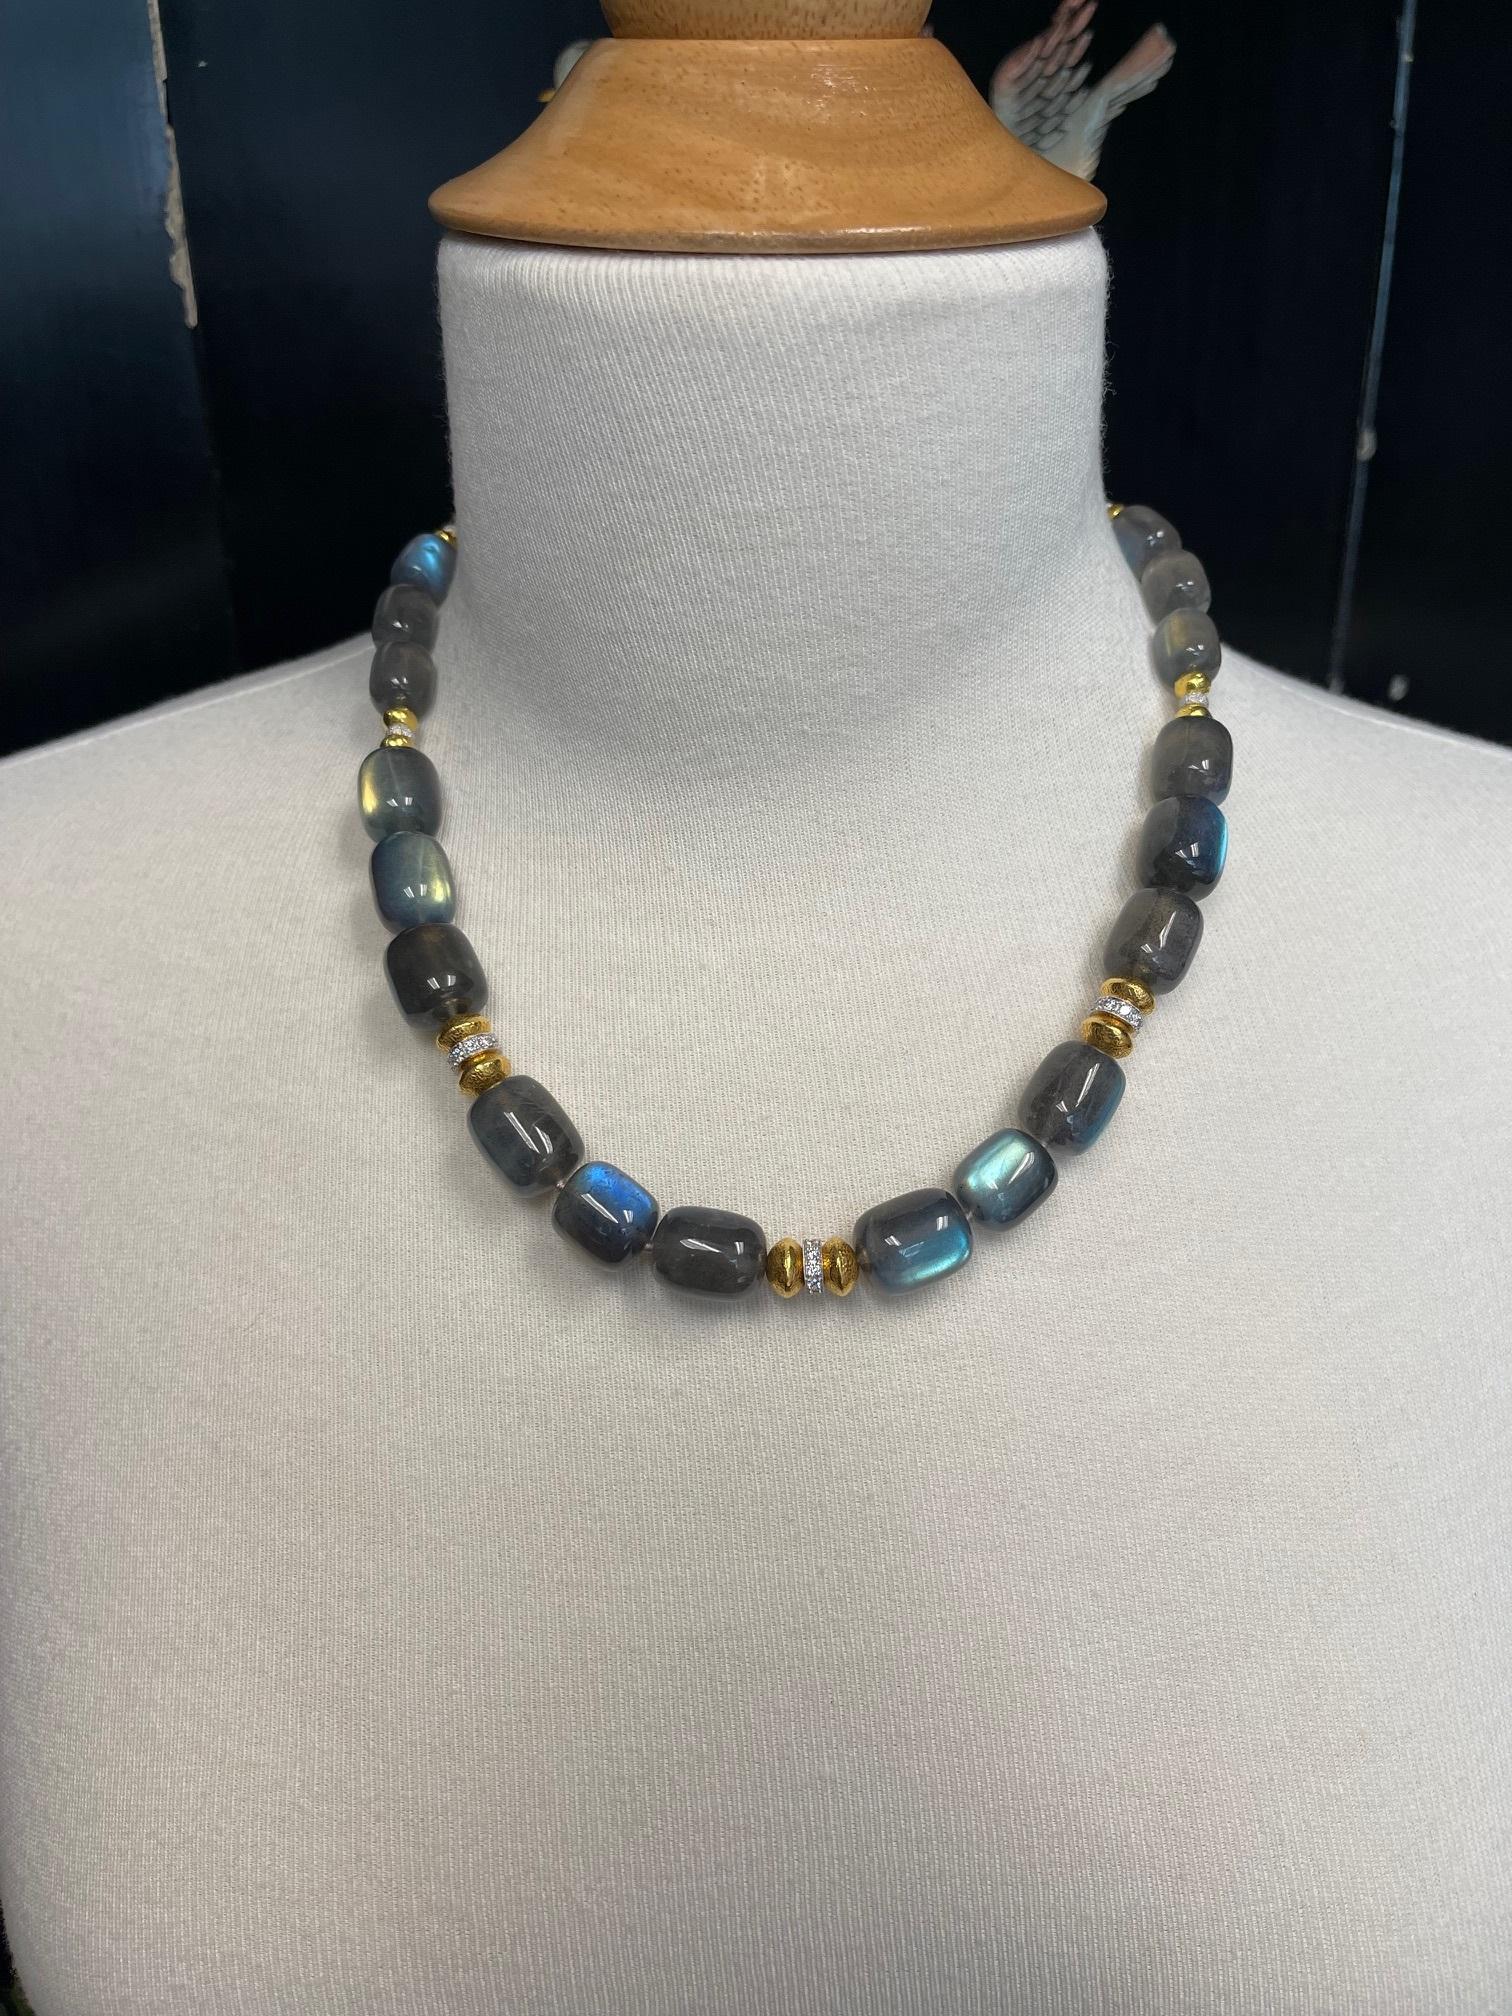  Labradorite Beaded Necklace with Diamonds and Yellow Gold Accents, 19 Inches 2